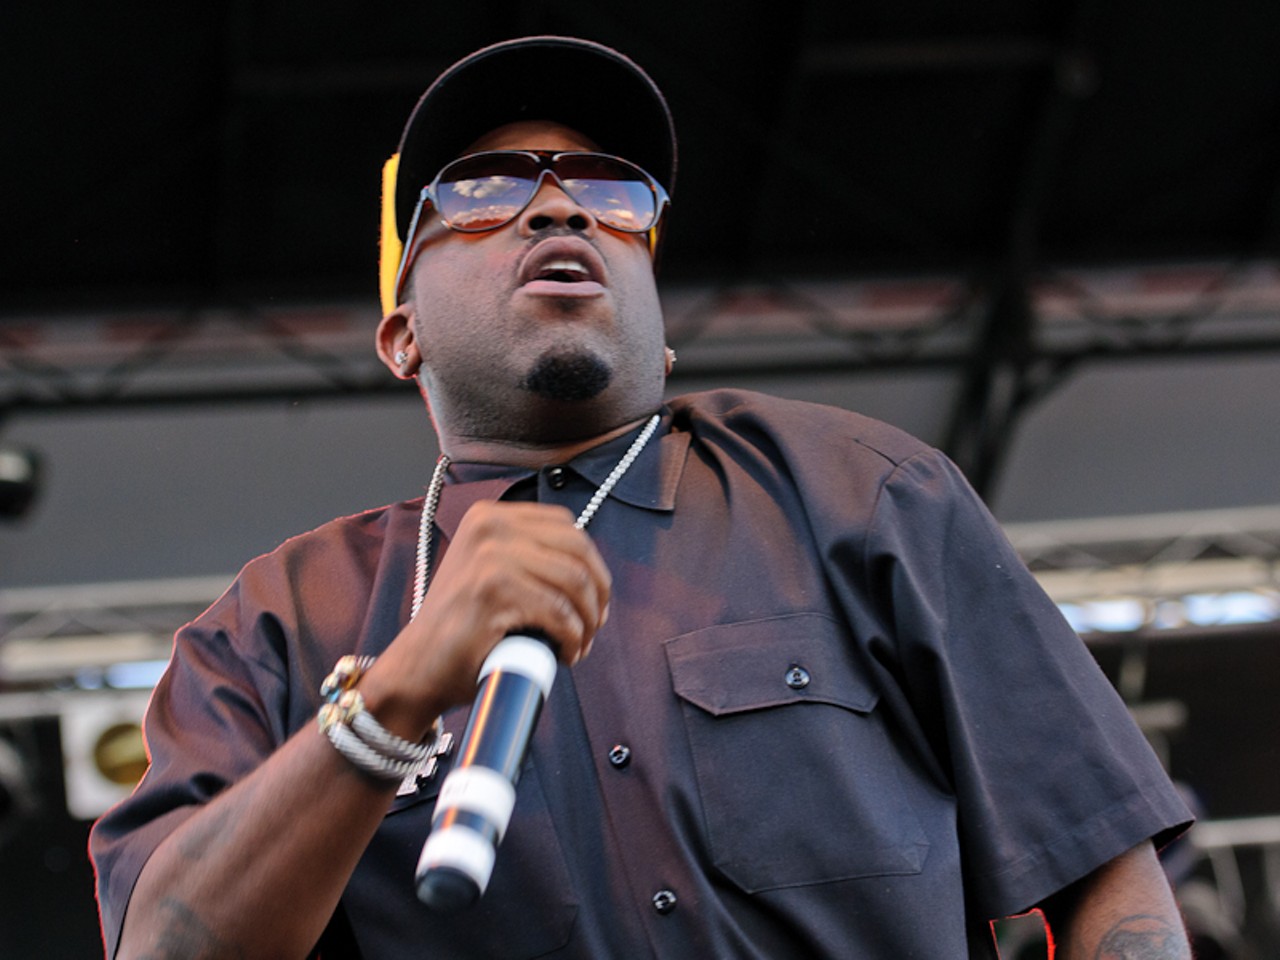 Big Boi at the Pitchfork Music Festival 2010 in Chicago.